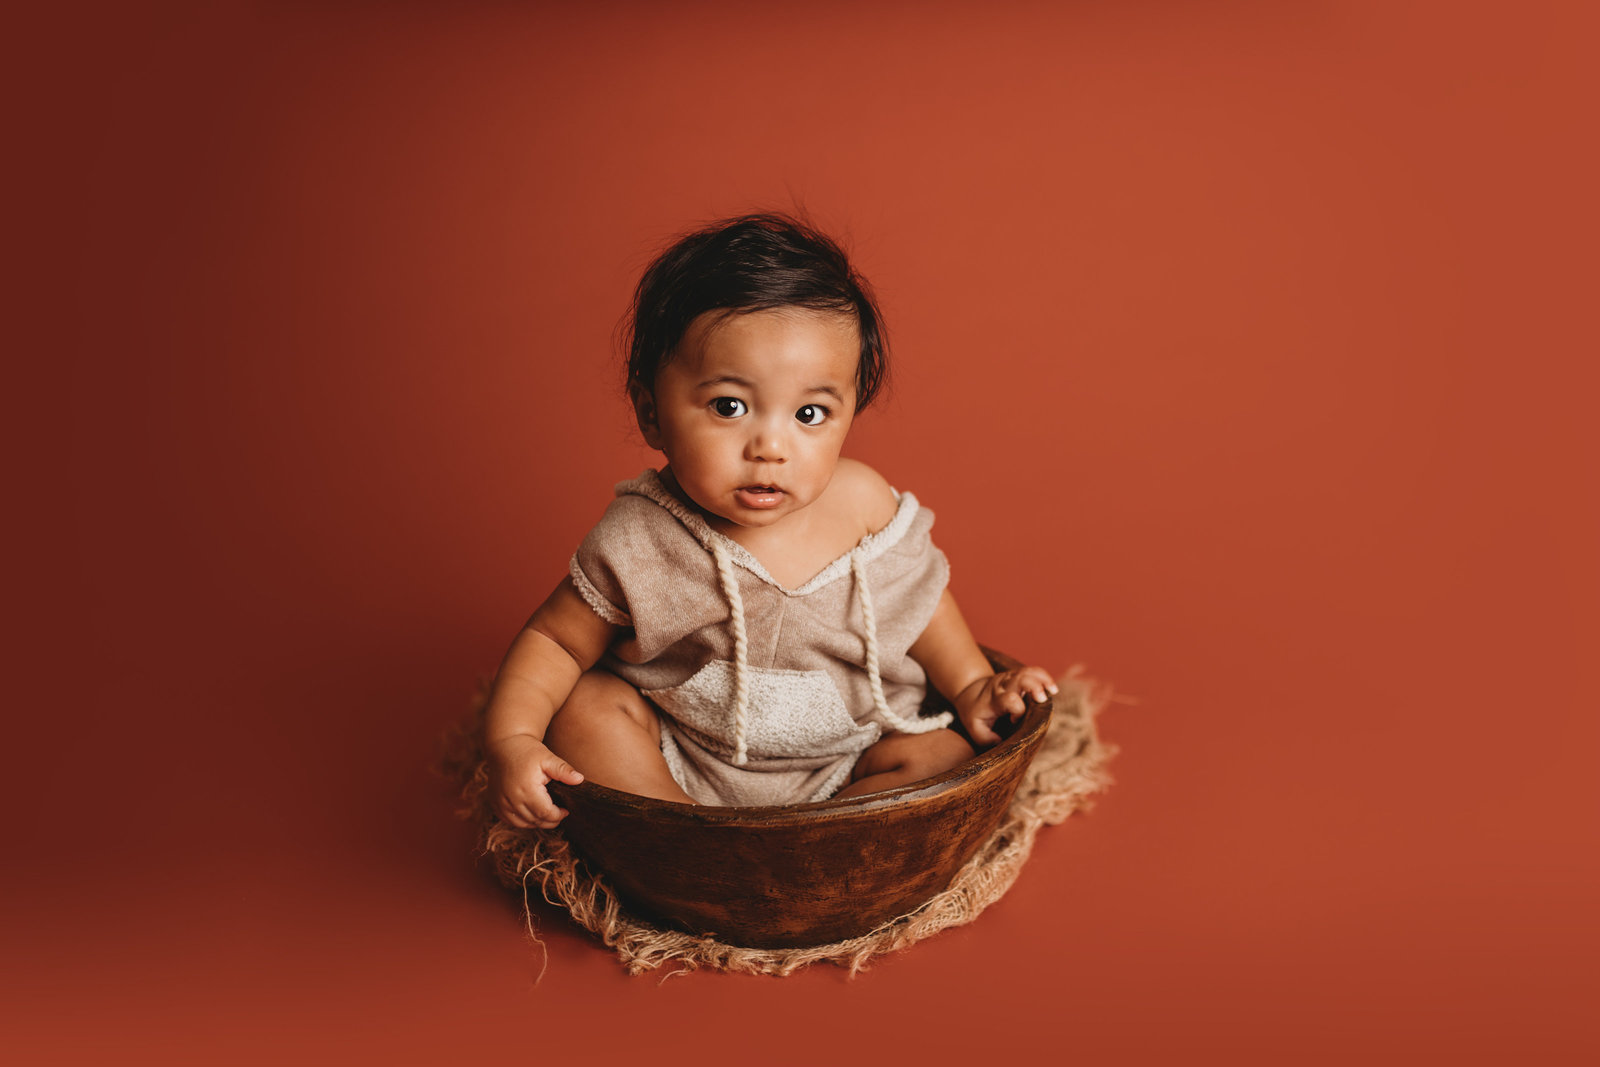 6 month old boy sitting in bowl prop during milestone photo session in Tampa Bay